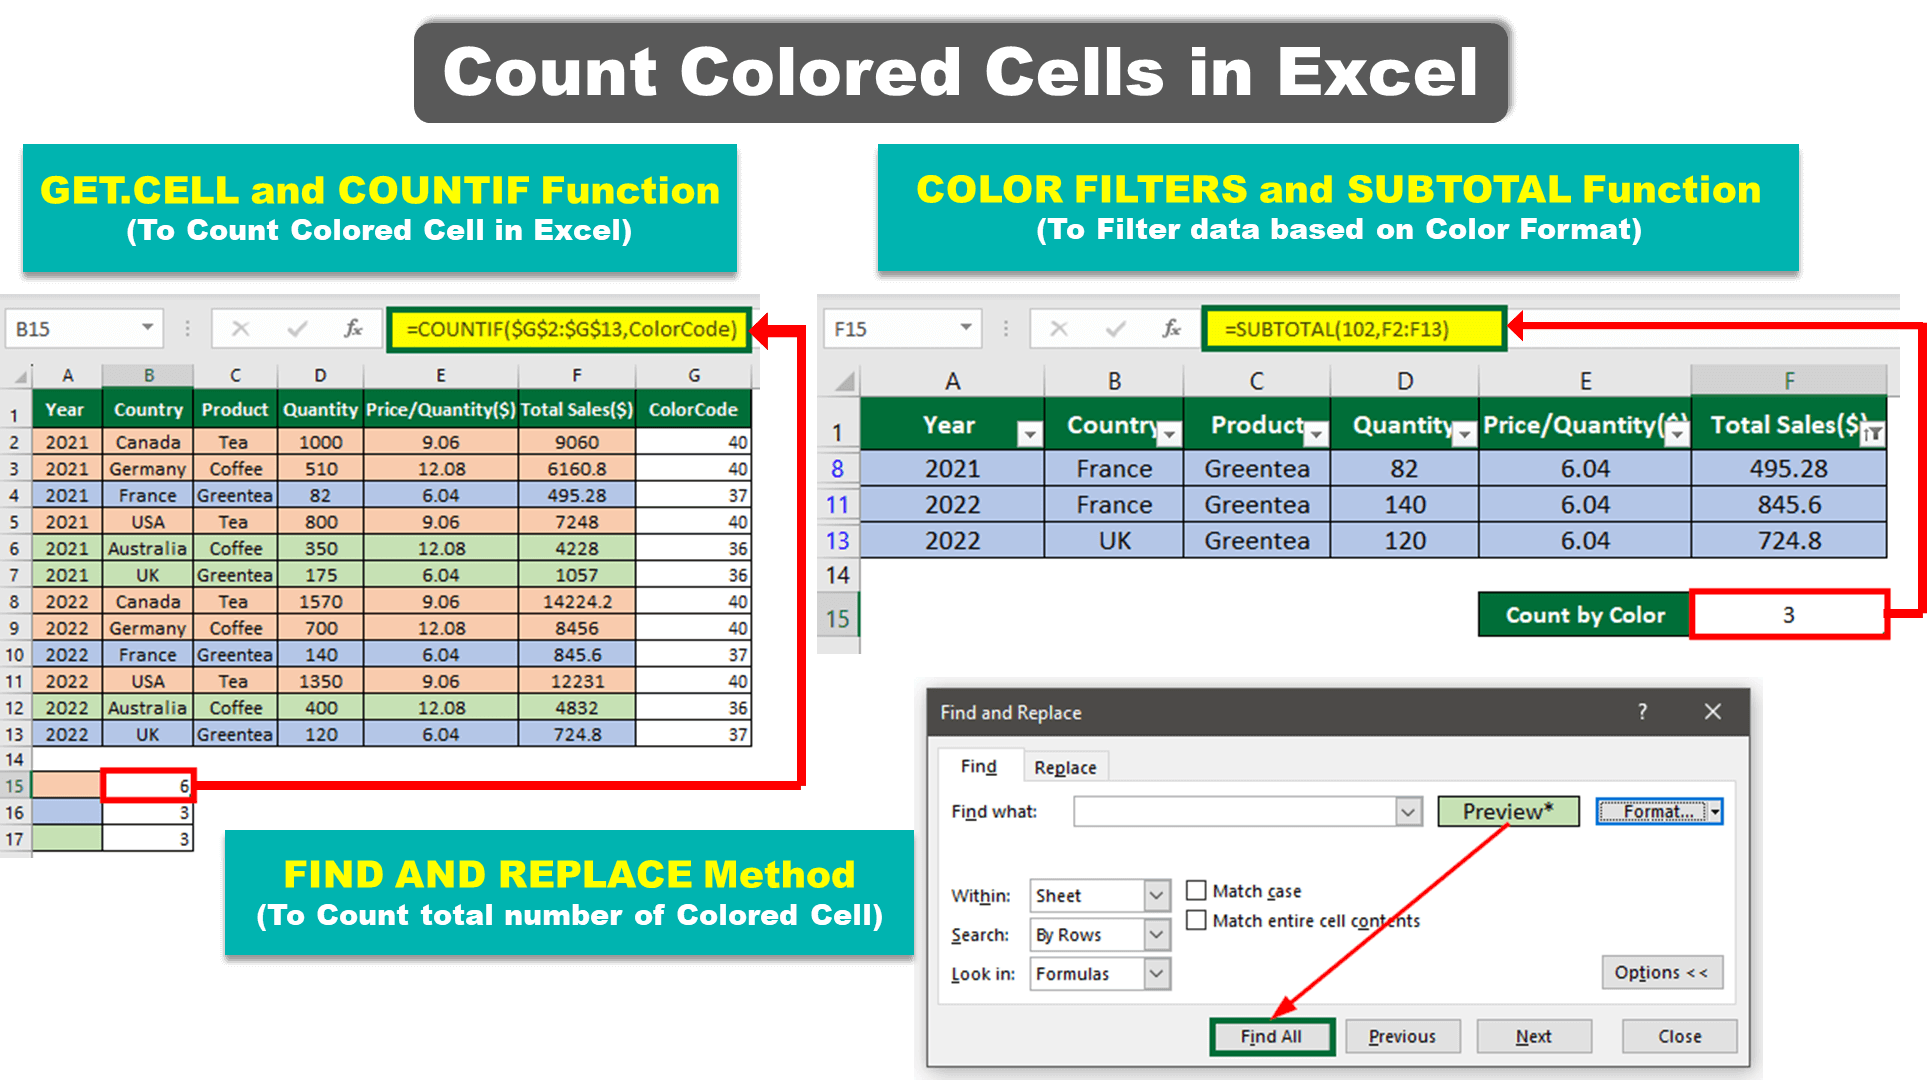 Count Colored Cells in Excel